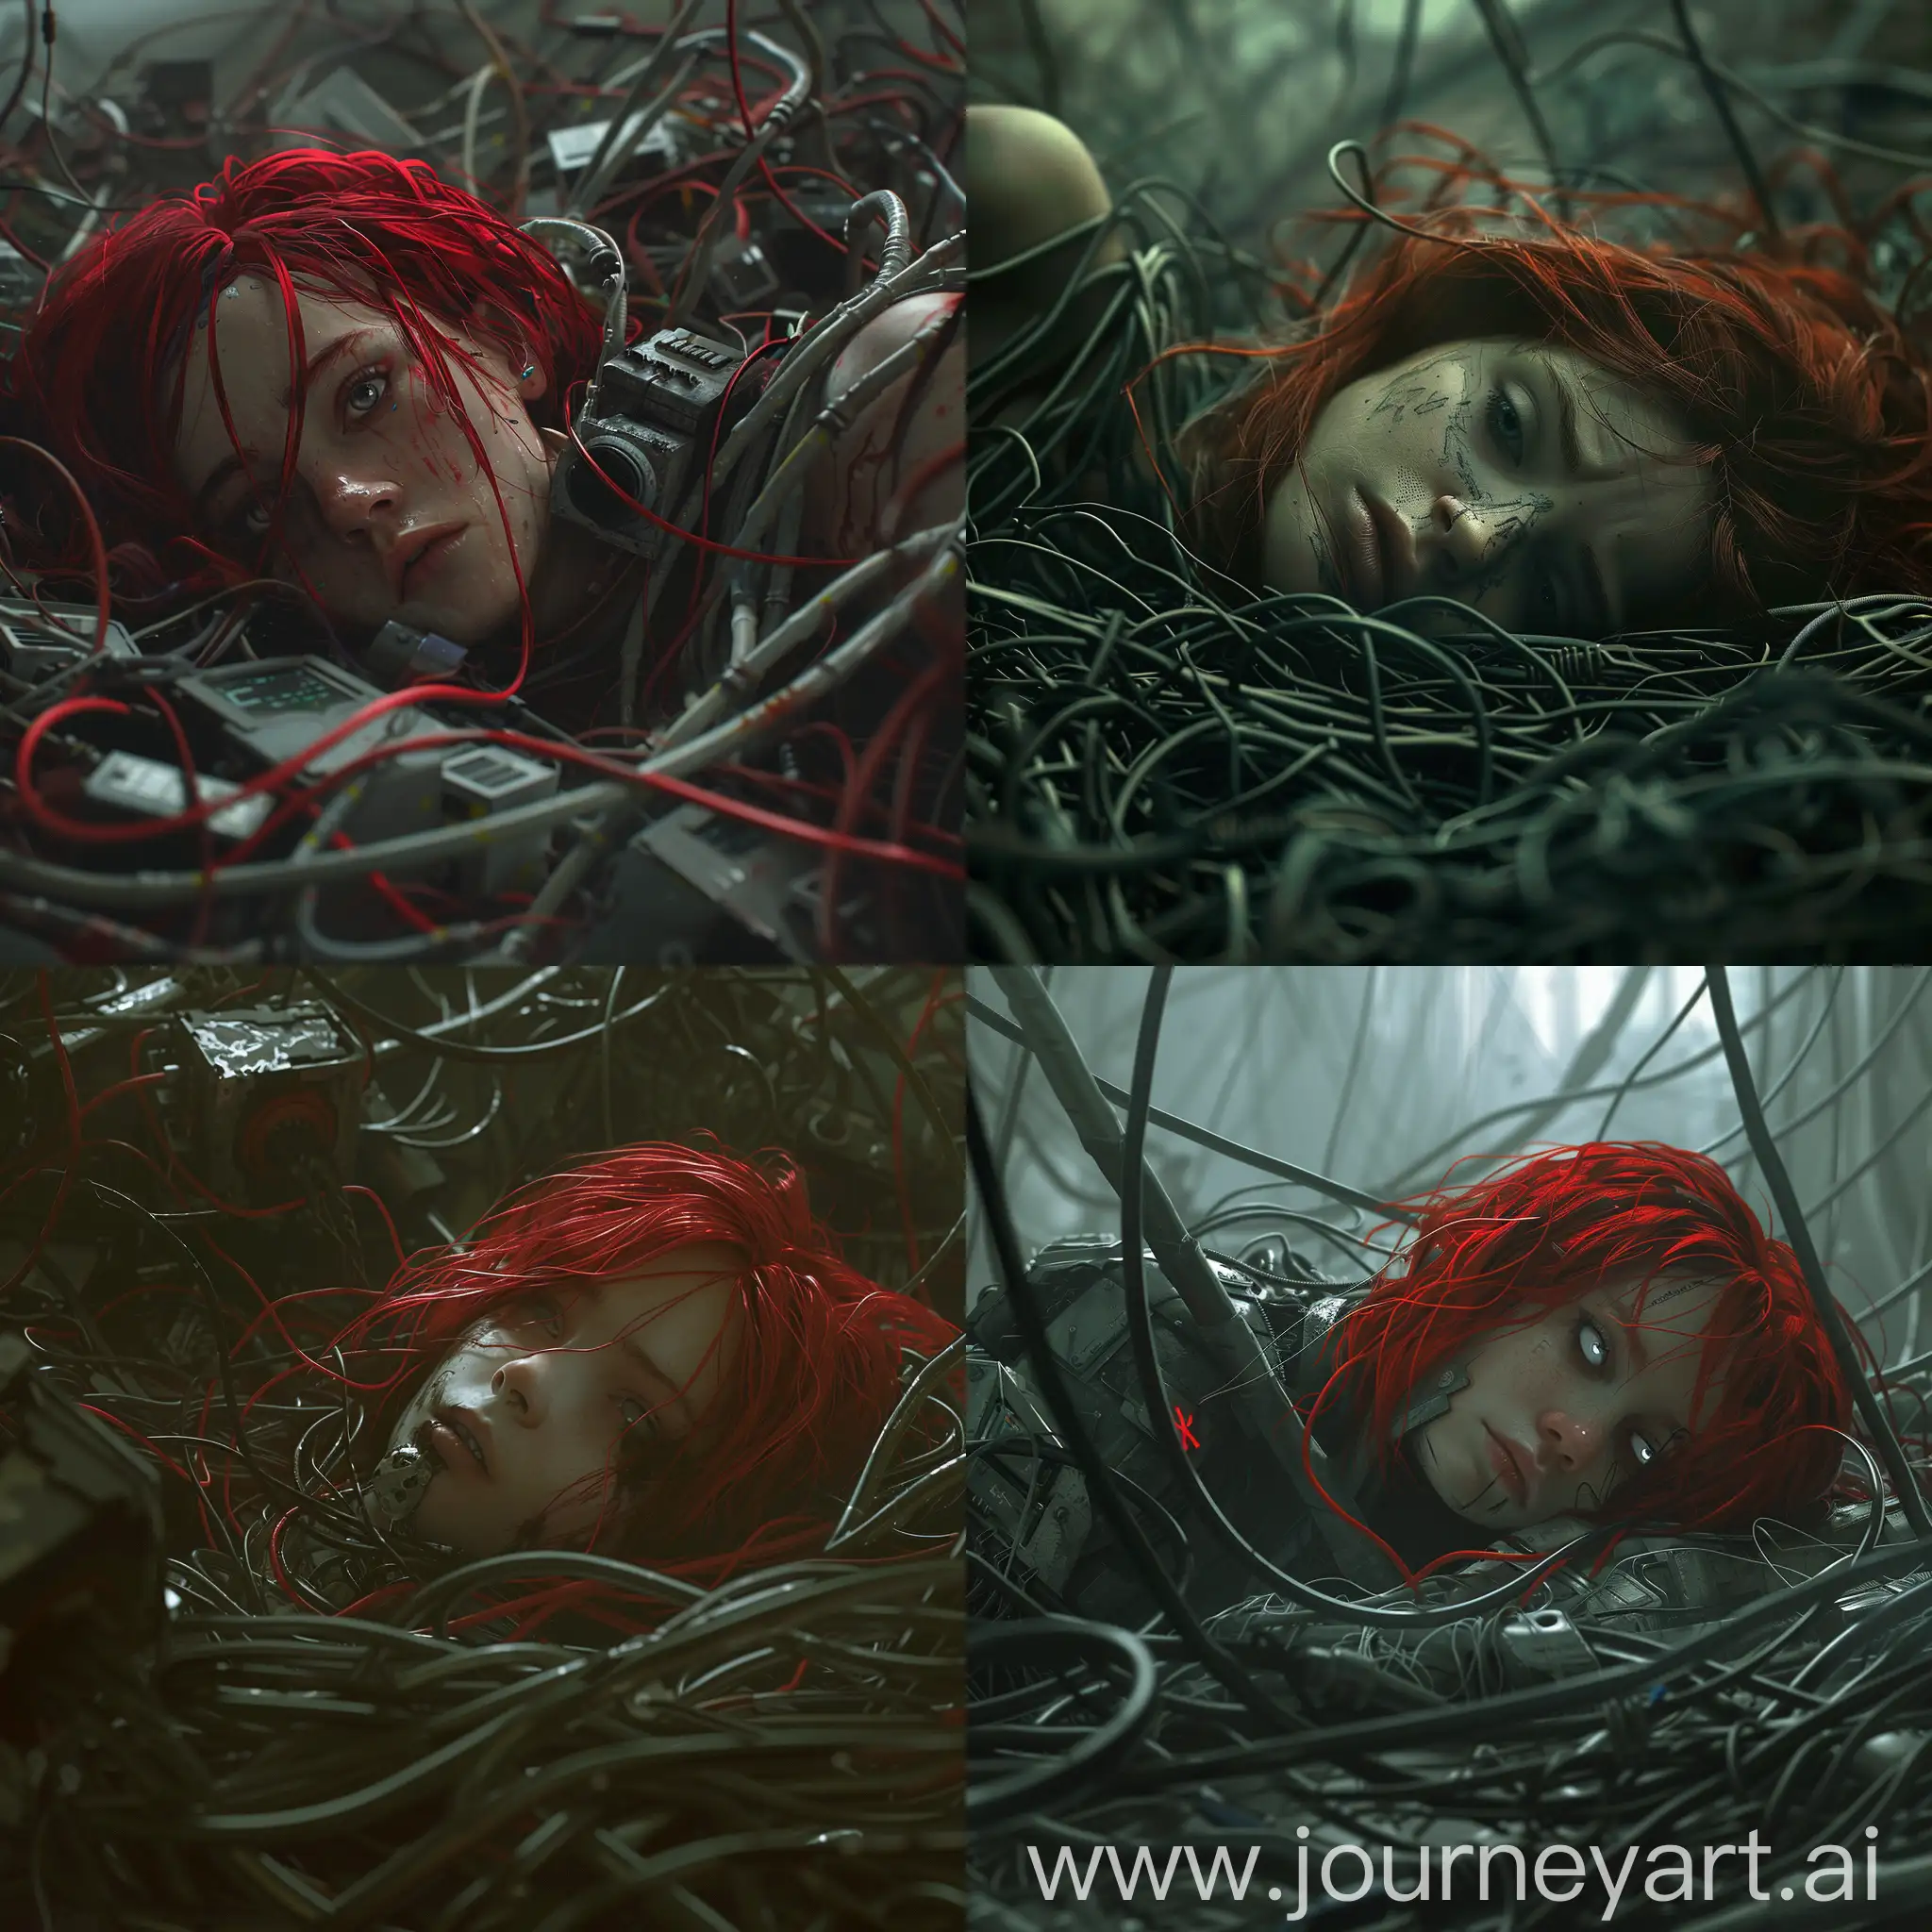 Gloomy-Cyberpunk-Scene-RedHaired-Girl-Entwined-in-Wires